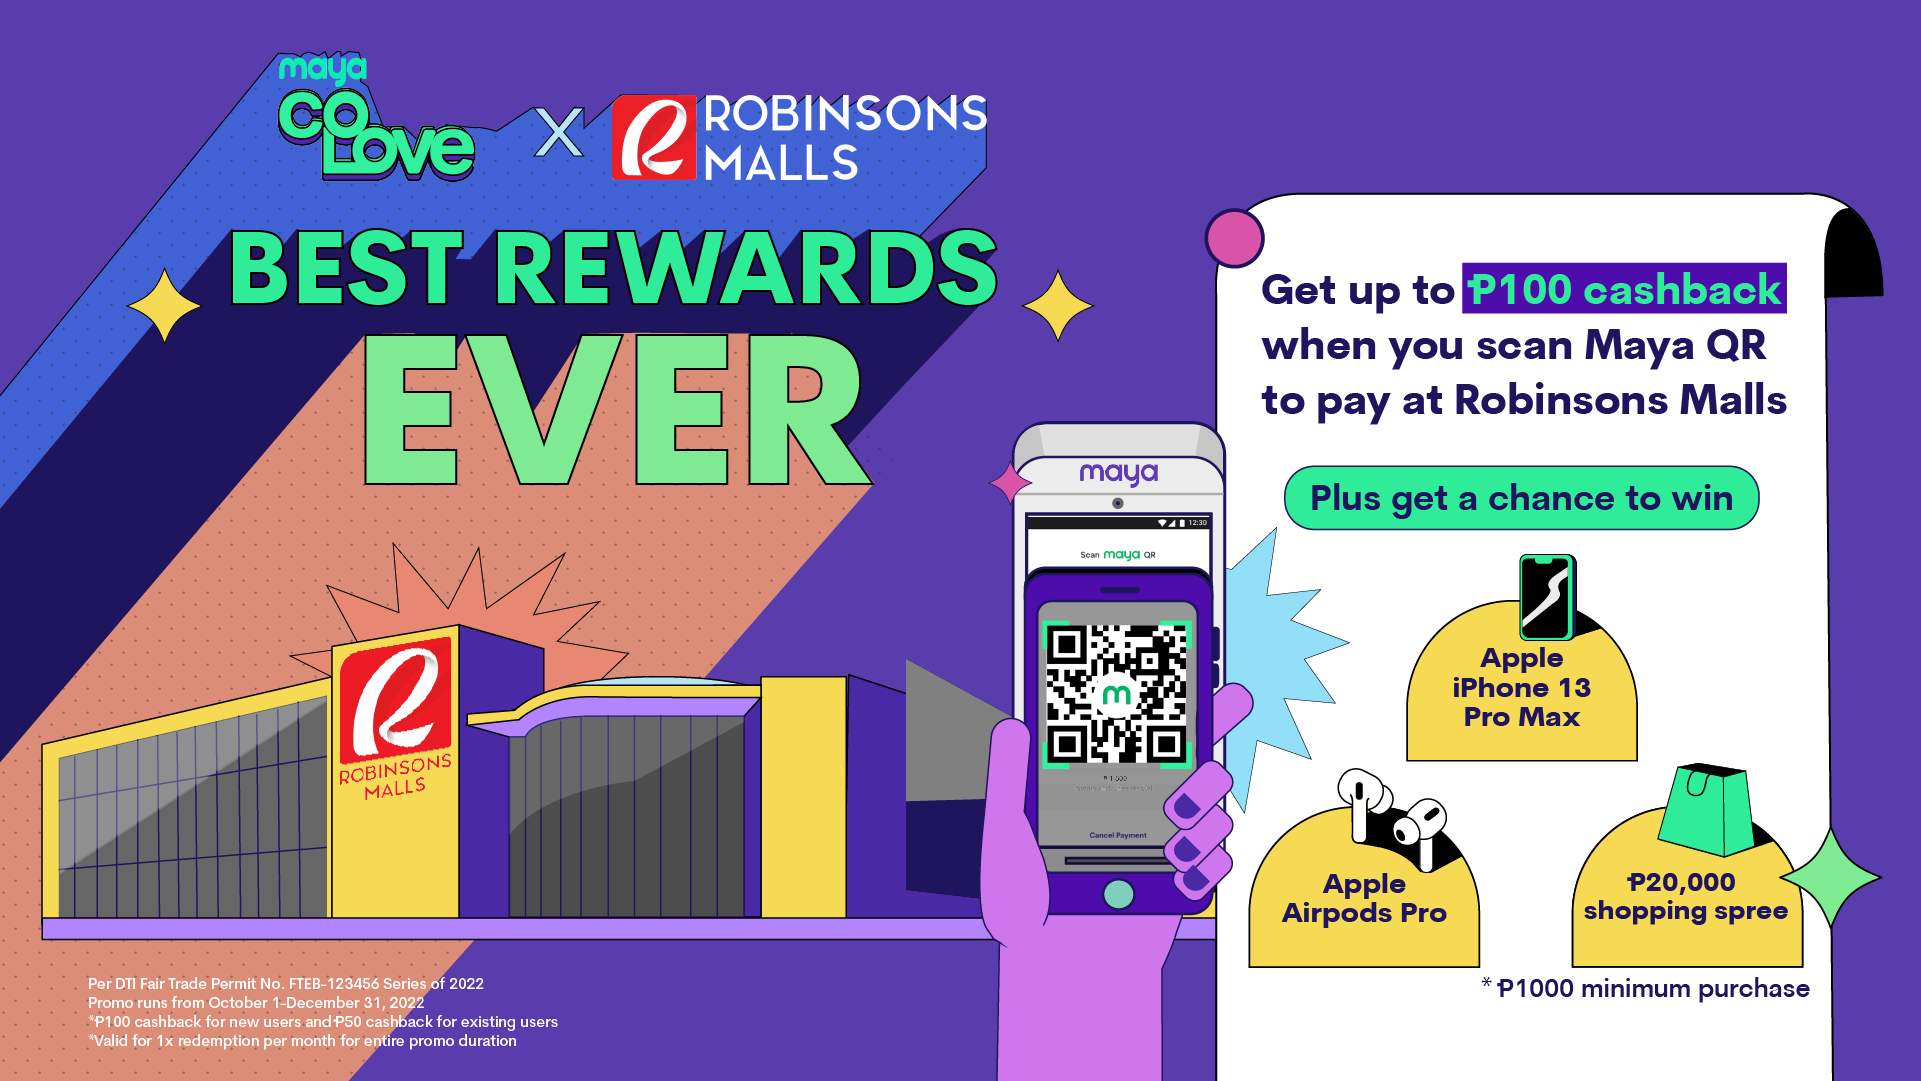 Get a chance to win a ₱20,000 shopping spree for a minimum spend of ₱1,000 at Robinsons Malls